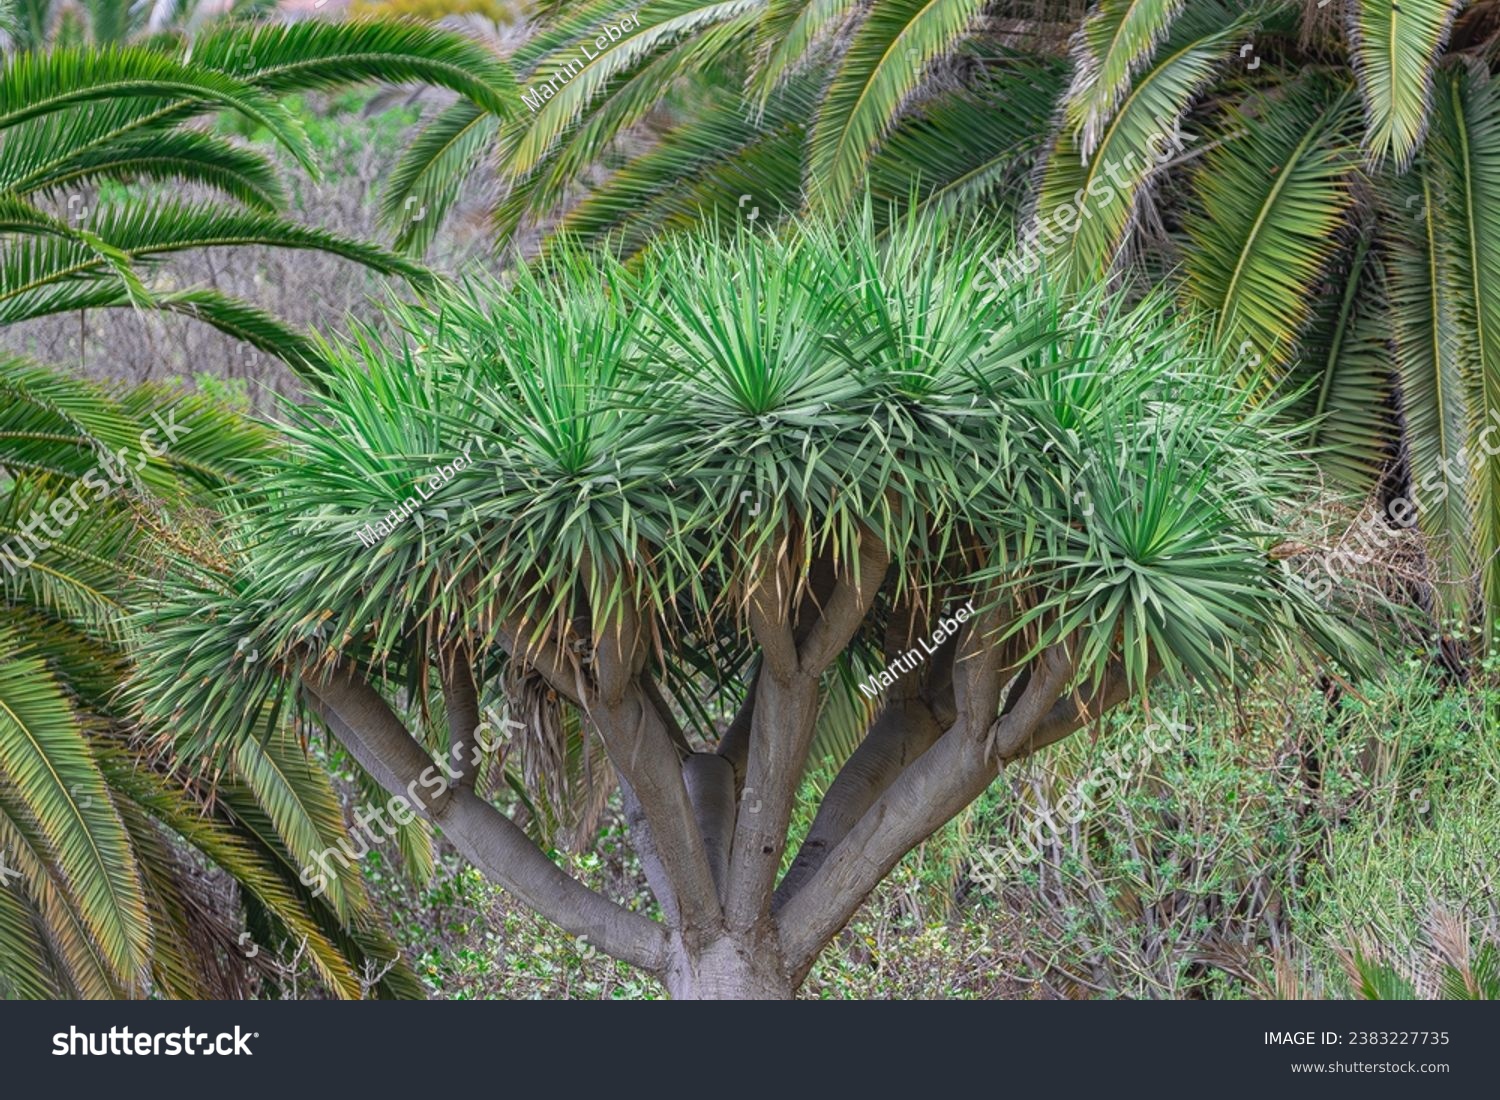 Canary Islands dragon tree, (Dracaena draco), with palm fronds background, in Tenerife, Canary islands #2383227735